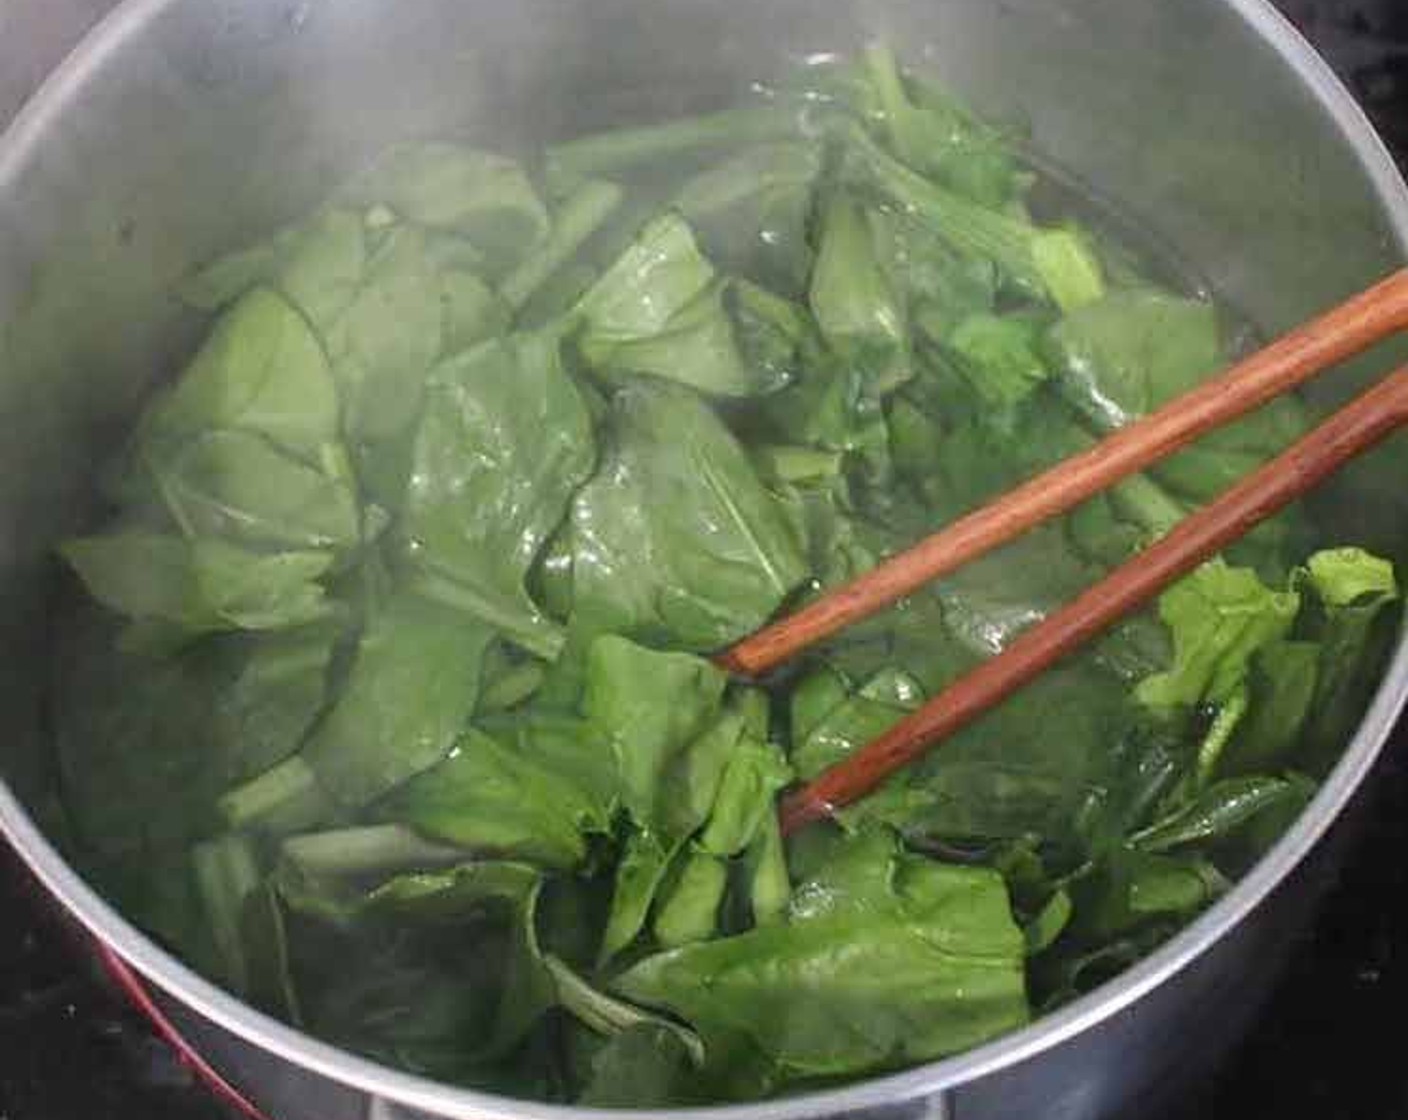 step 2 Bring a pot of Water (3 1/3 cups) and half a teaspoon of the Salt (1/2 tsp) to a boil and cook the spinach for 2 minutes.